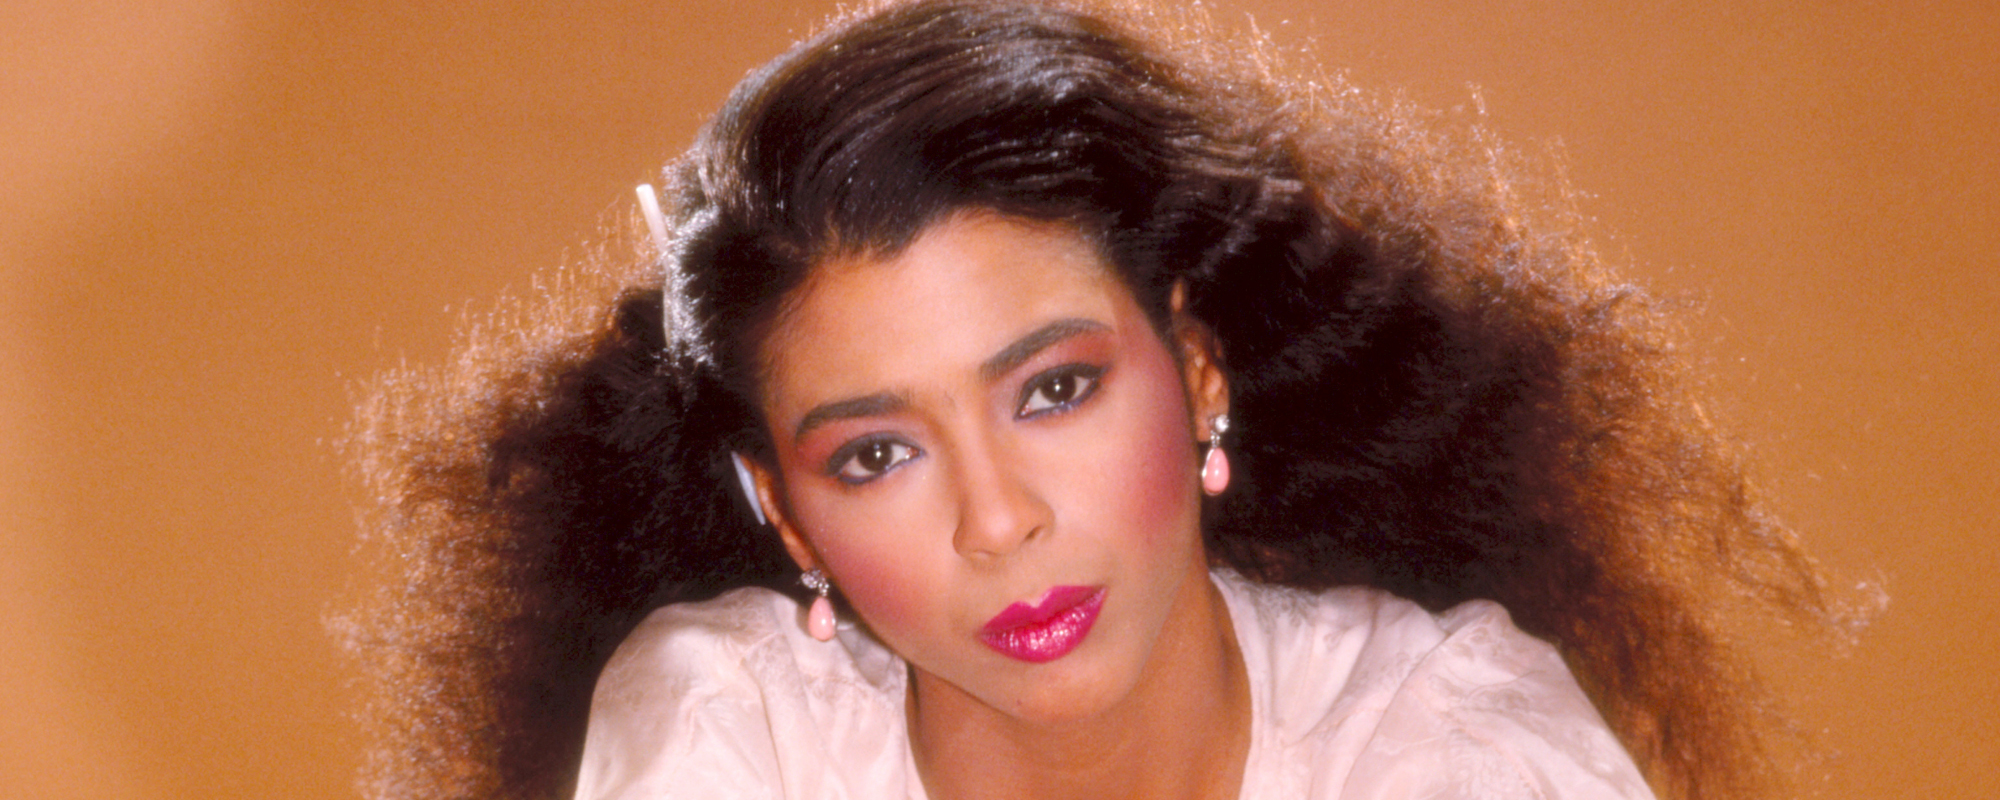 “Flashdance” Co-Writer and Singer Irene Cara Dies at 63